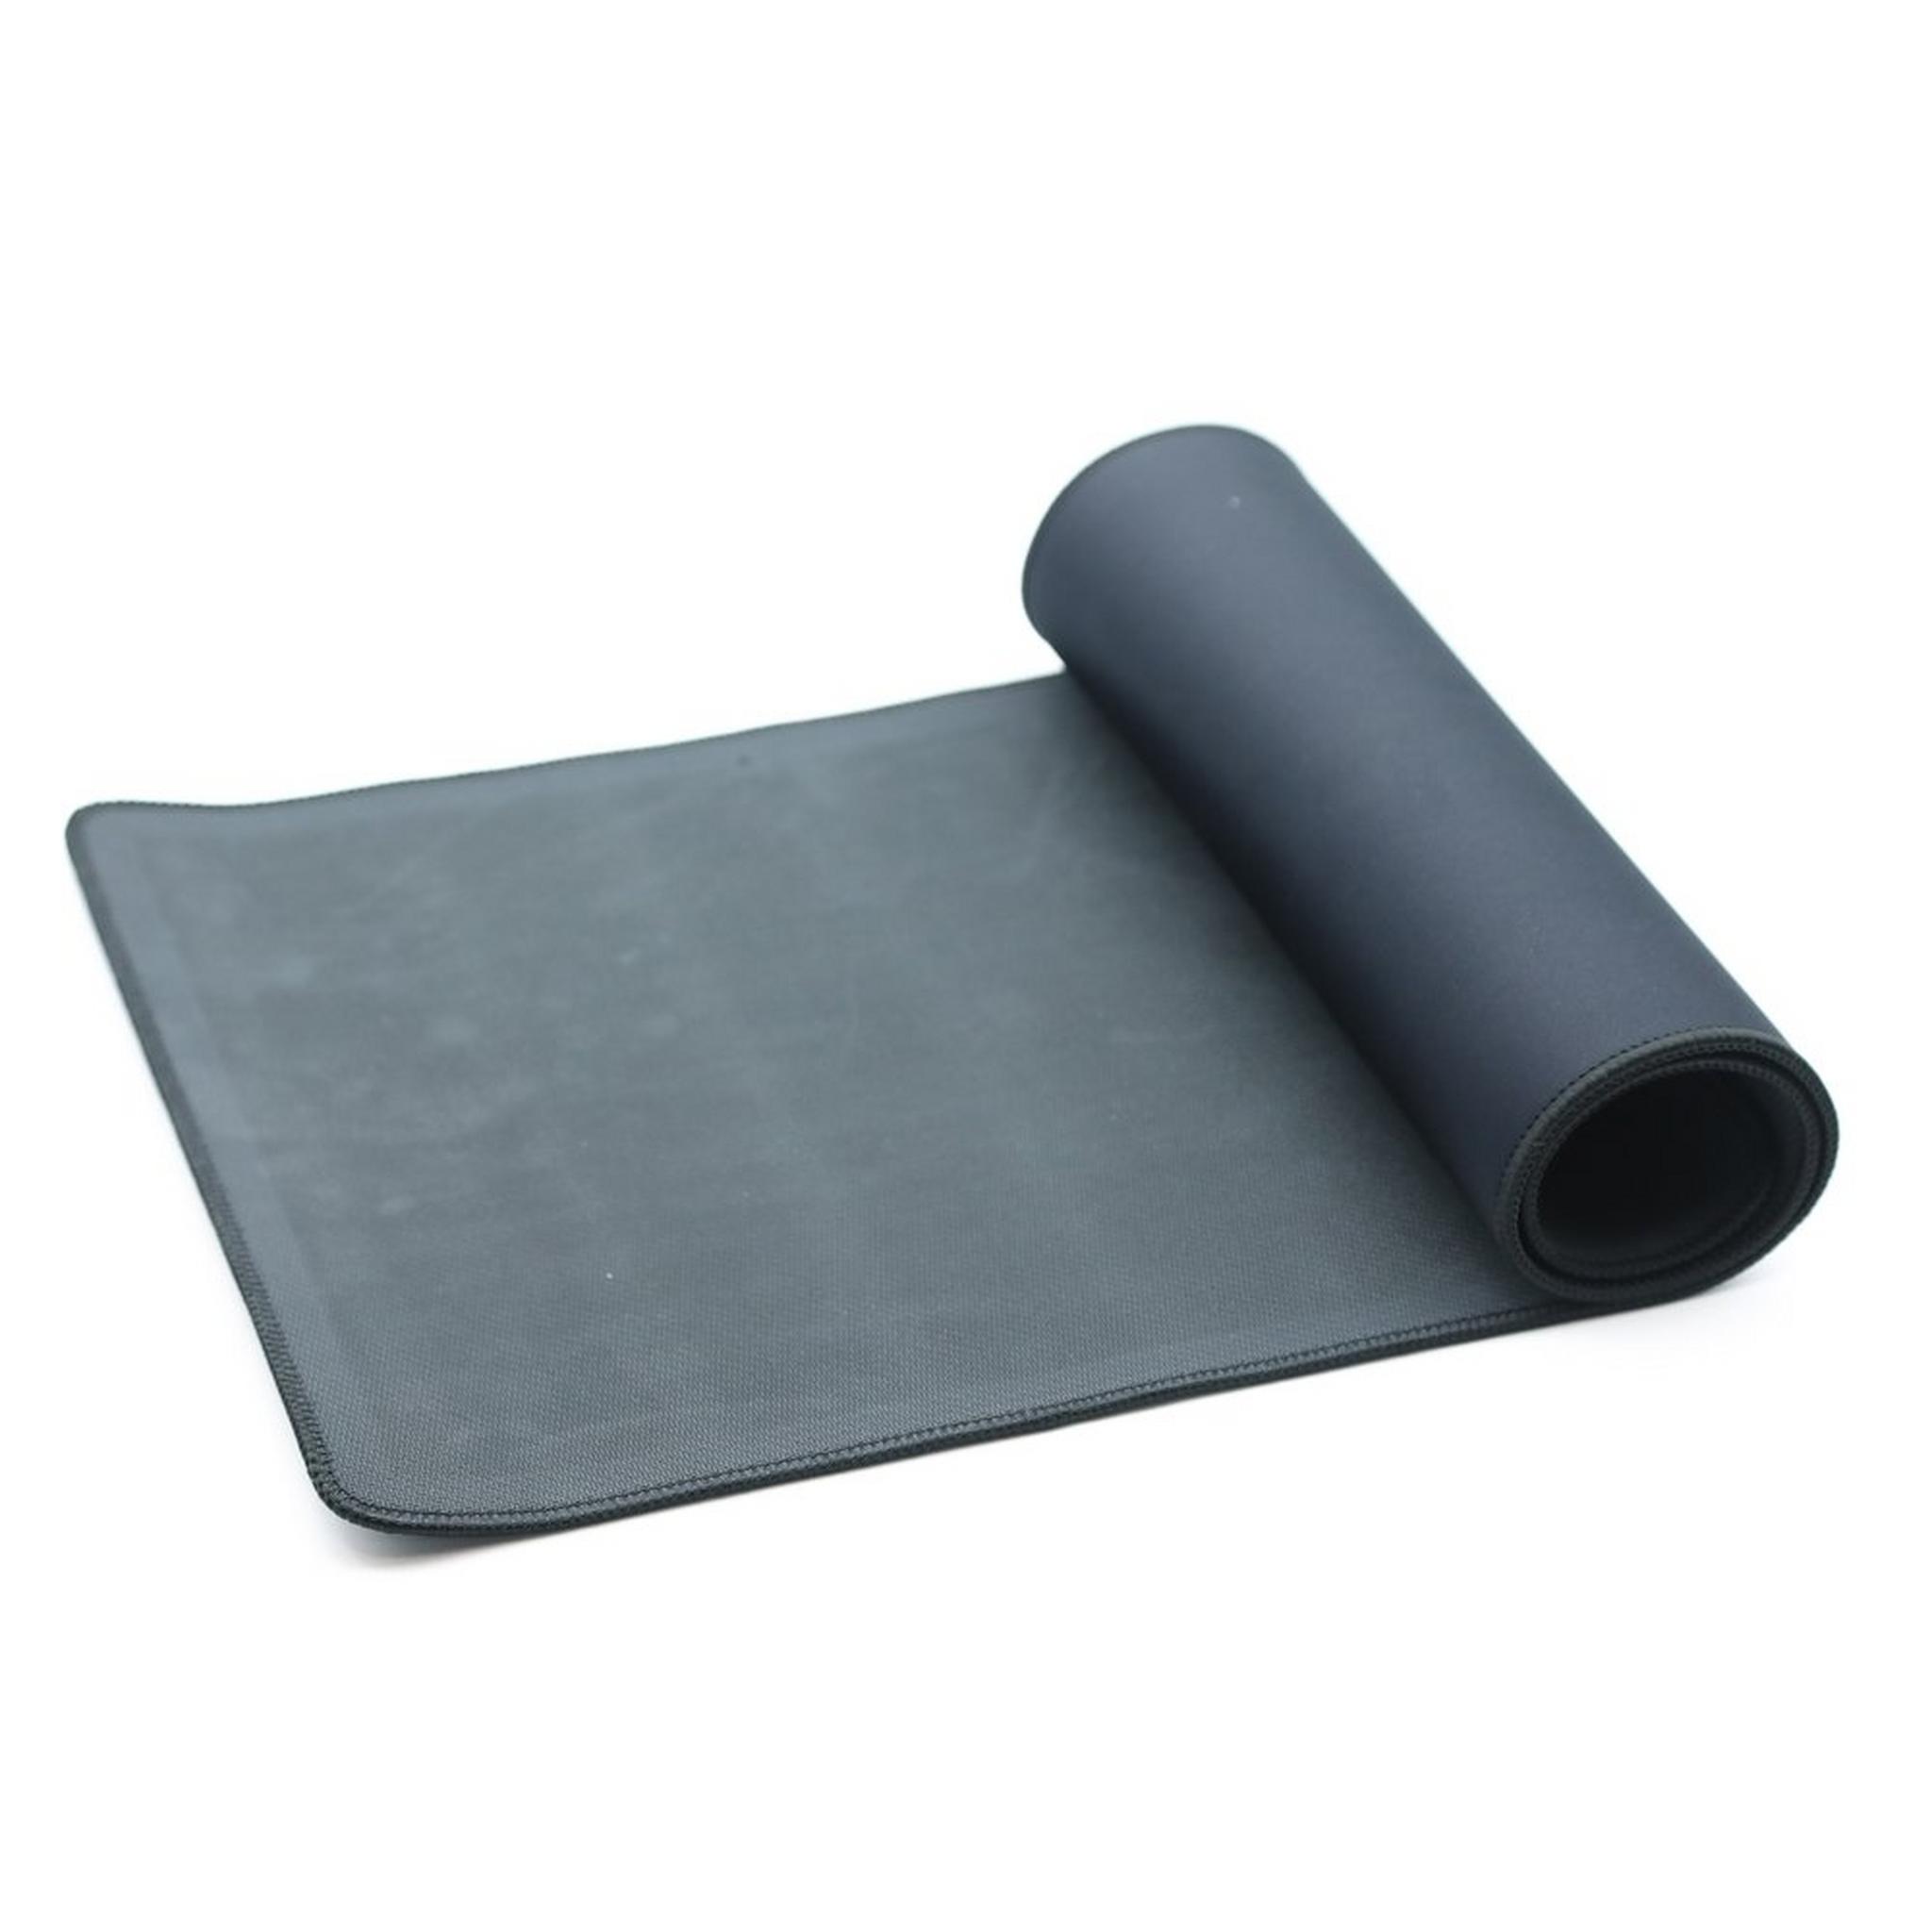 EQ Water-Proof Rubber Mouse Pad - Black